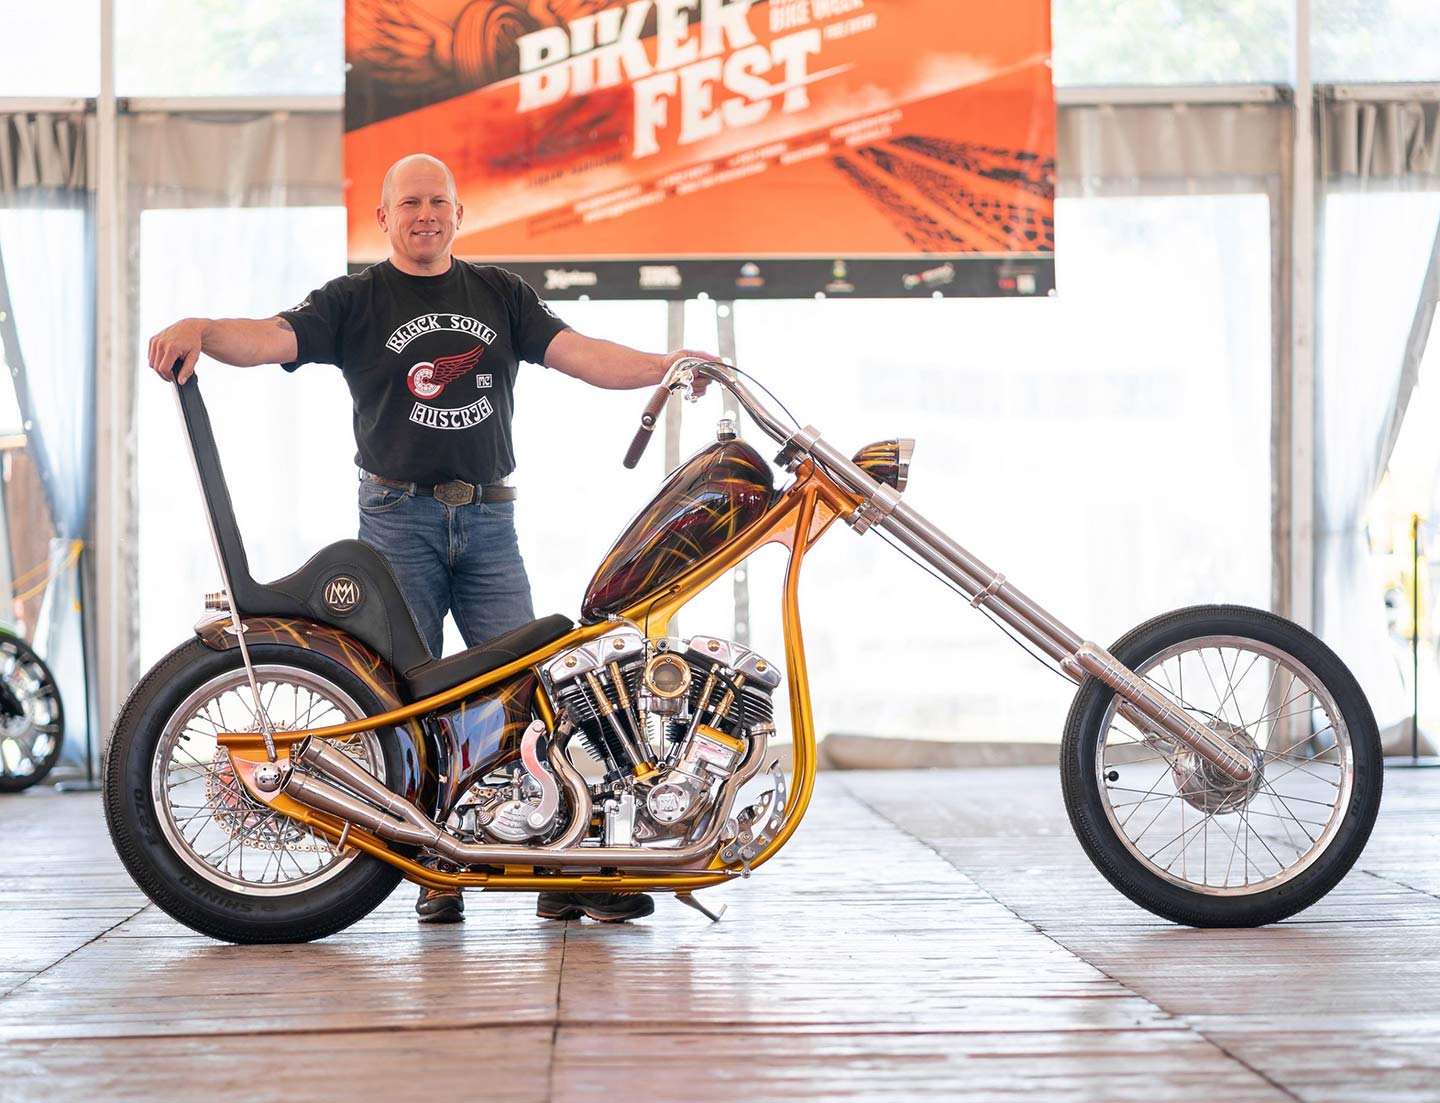 For the finals of the AMD-sponsored event, the international judging panel selected this Harley-Davidson FX chopper built by Austria’s Mayerl Motorcycles as No. 1.